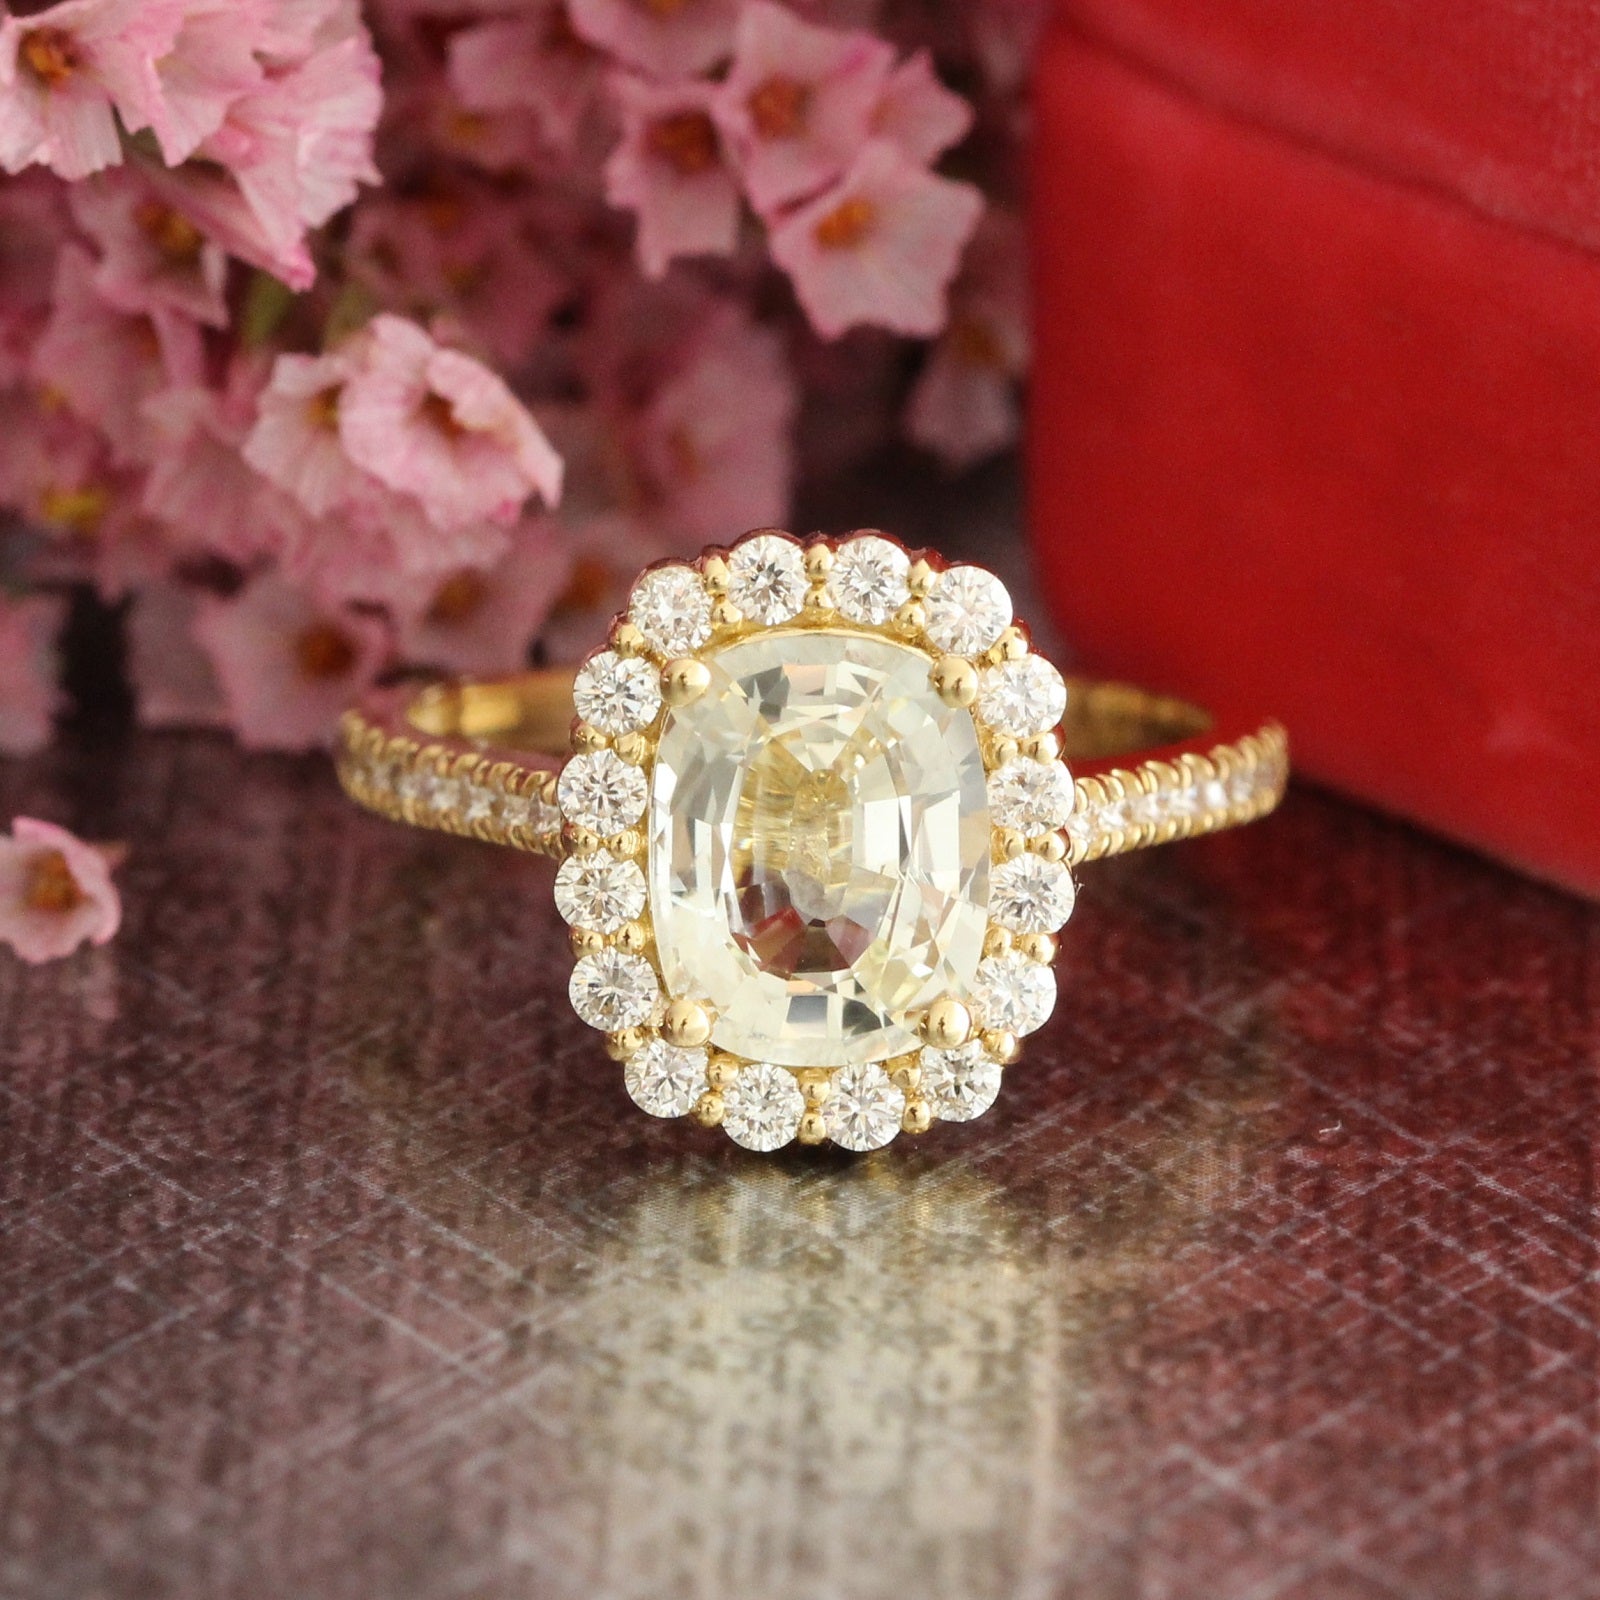 Natural champagne yellow sapphire engagement ring in 18k yellow gold by la more design